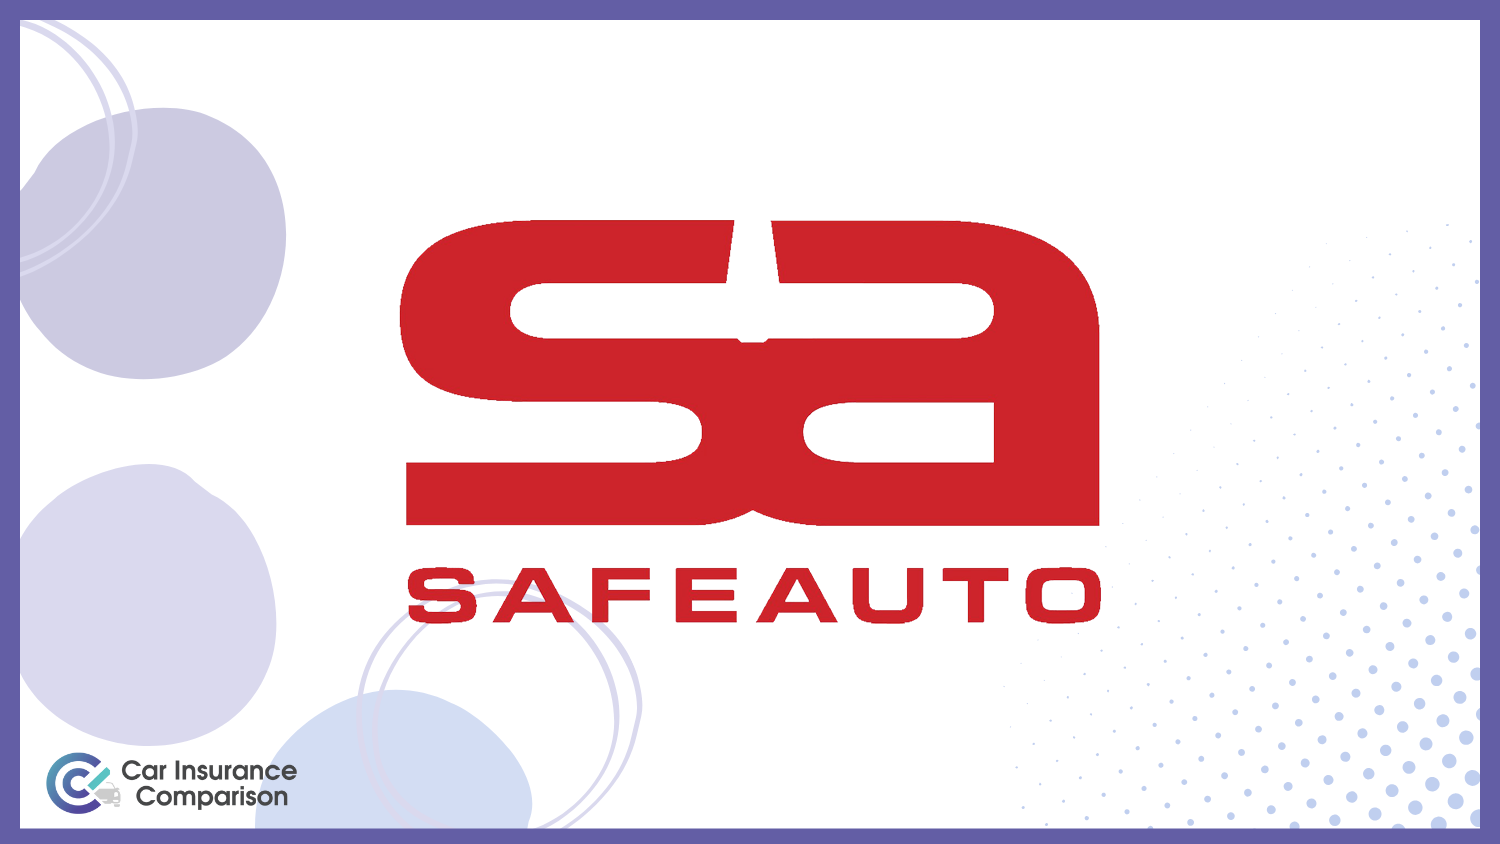 Safe Auto: Compare Best Car Insurance Companies That Accept a Suspended License